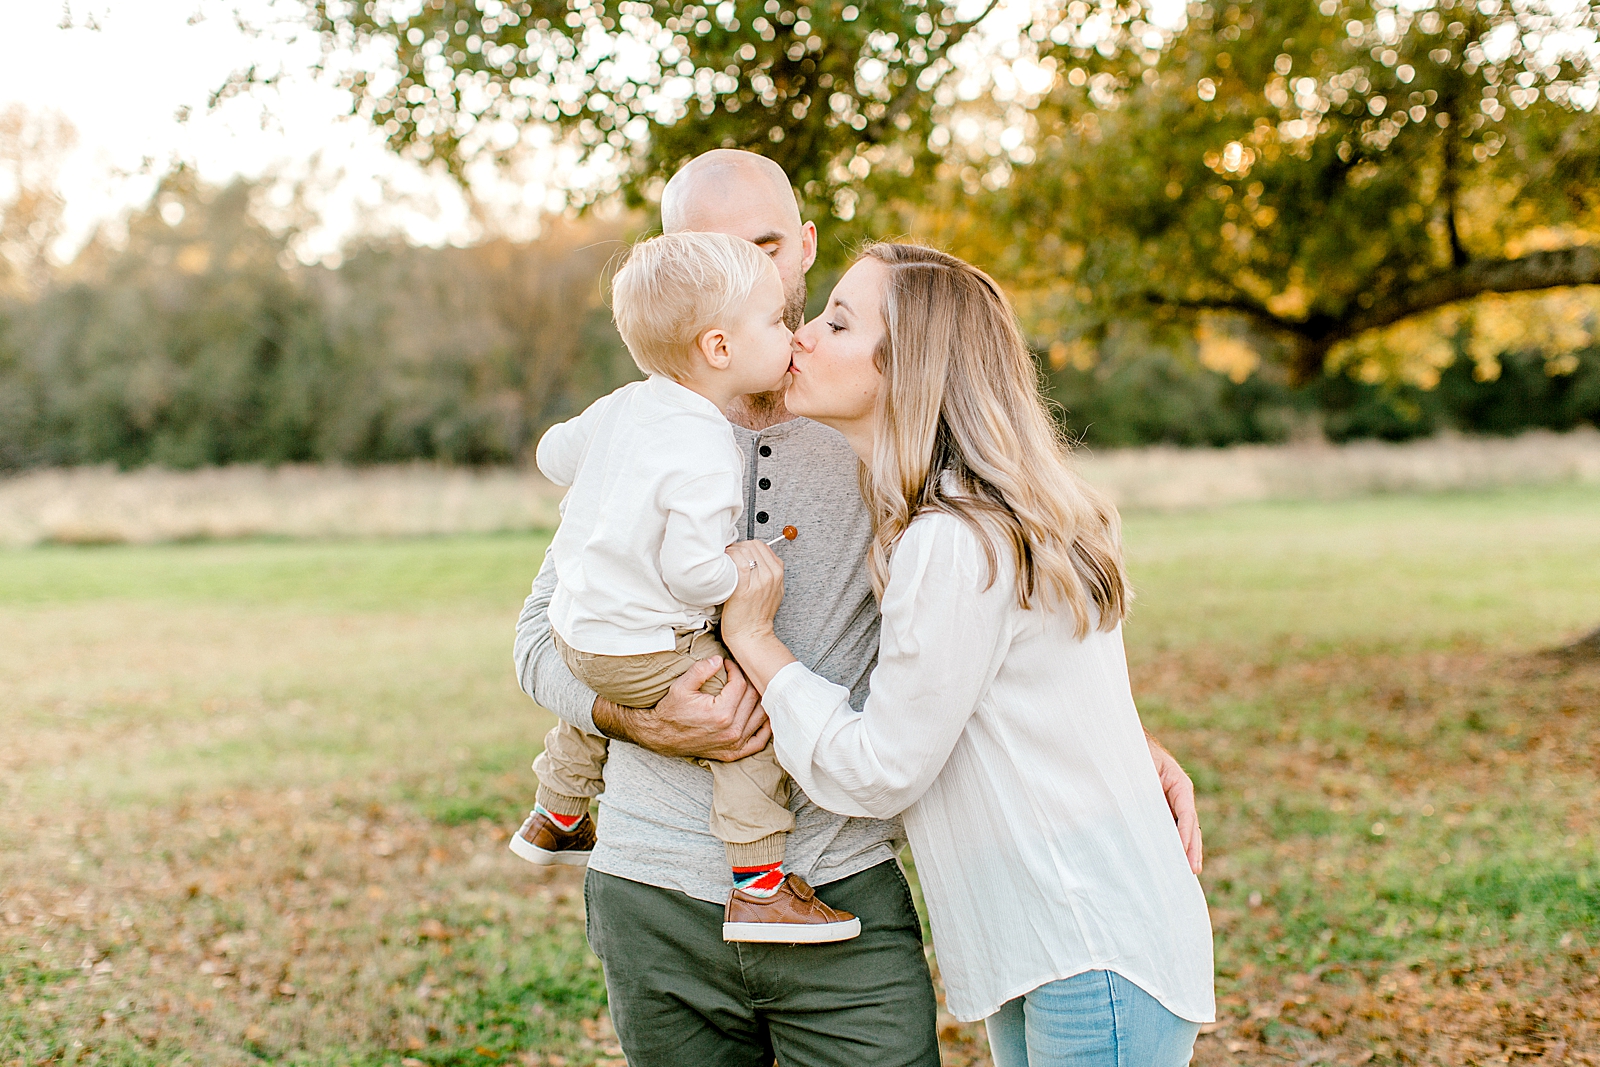 Greenville Lifestyle Family Photographer